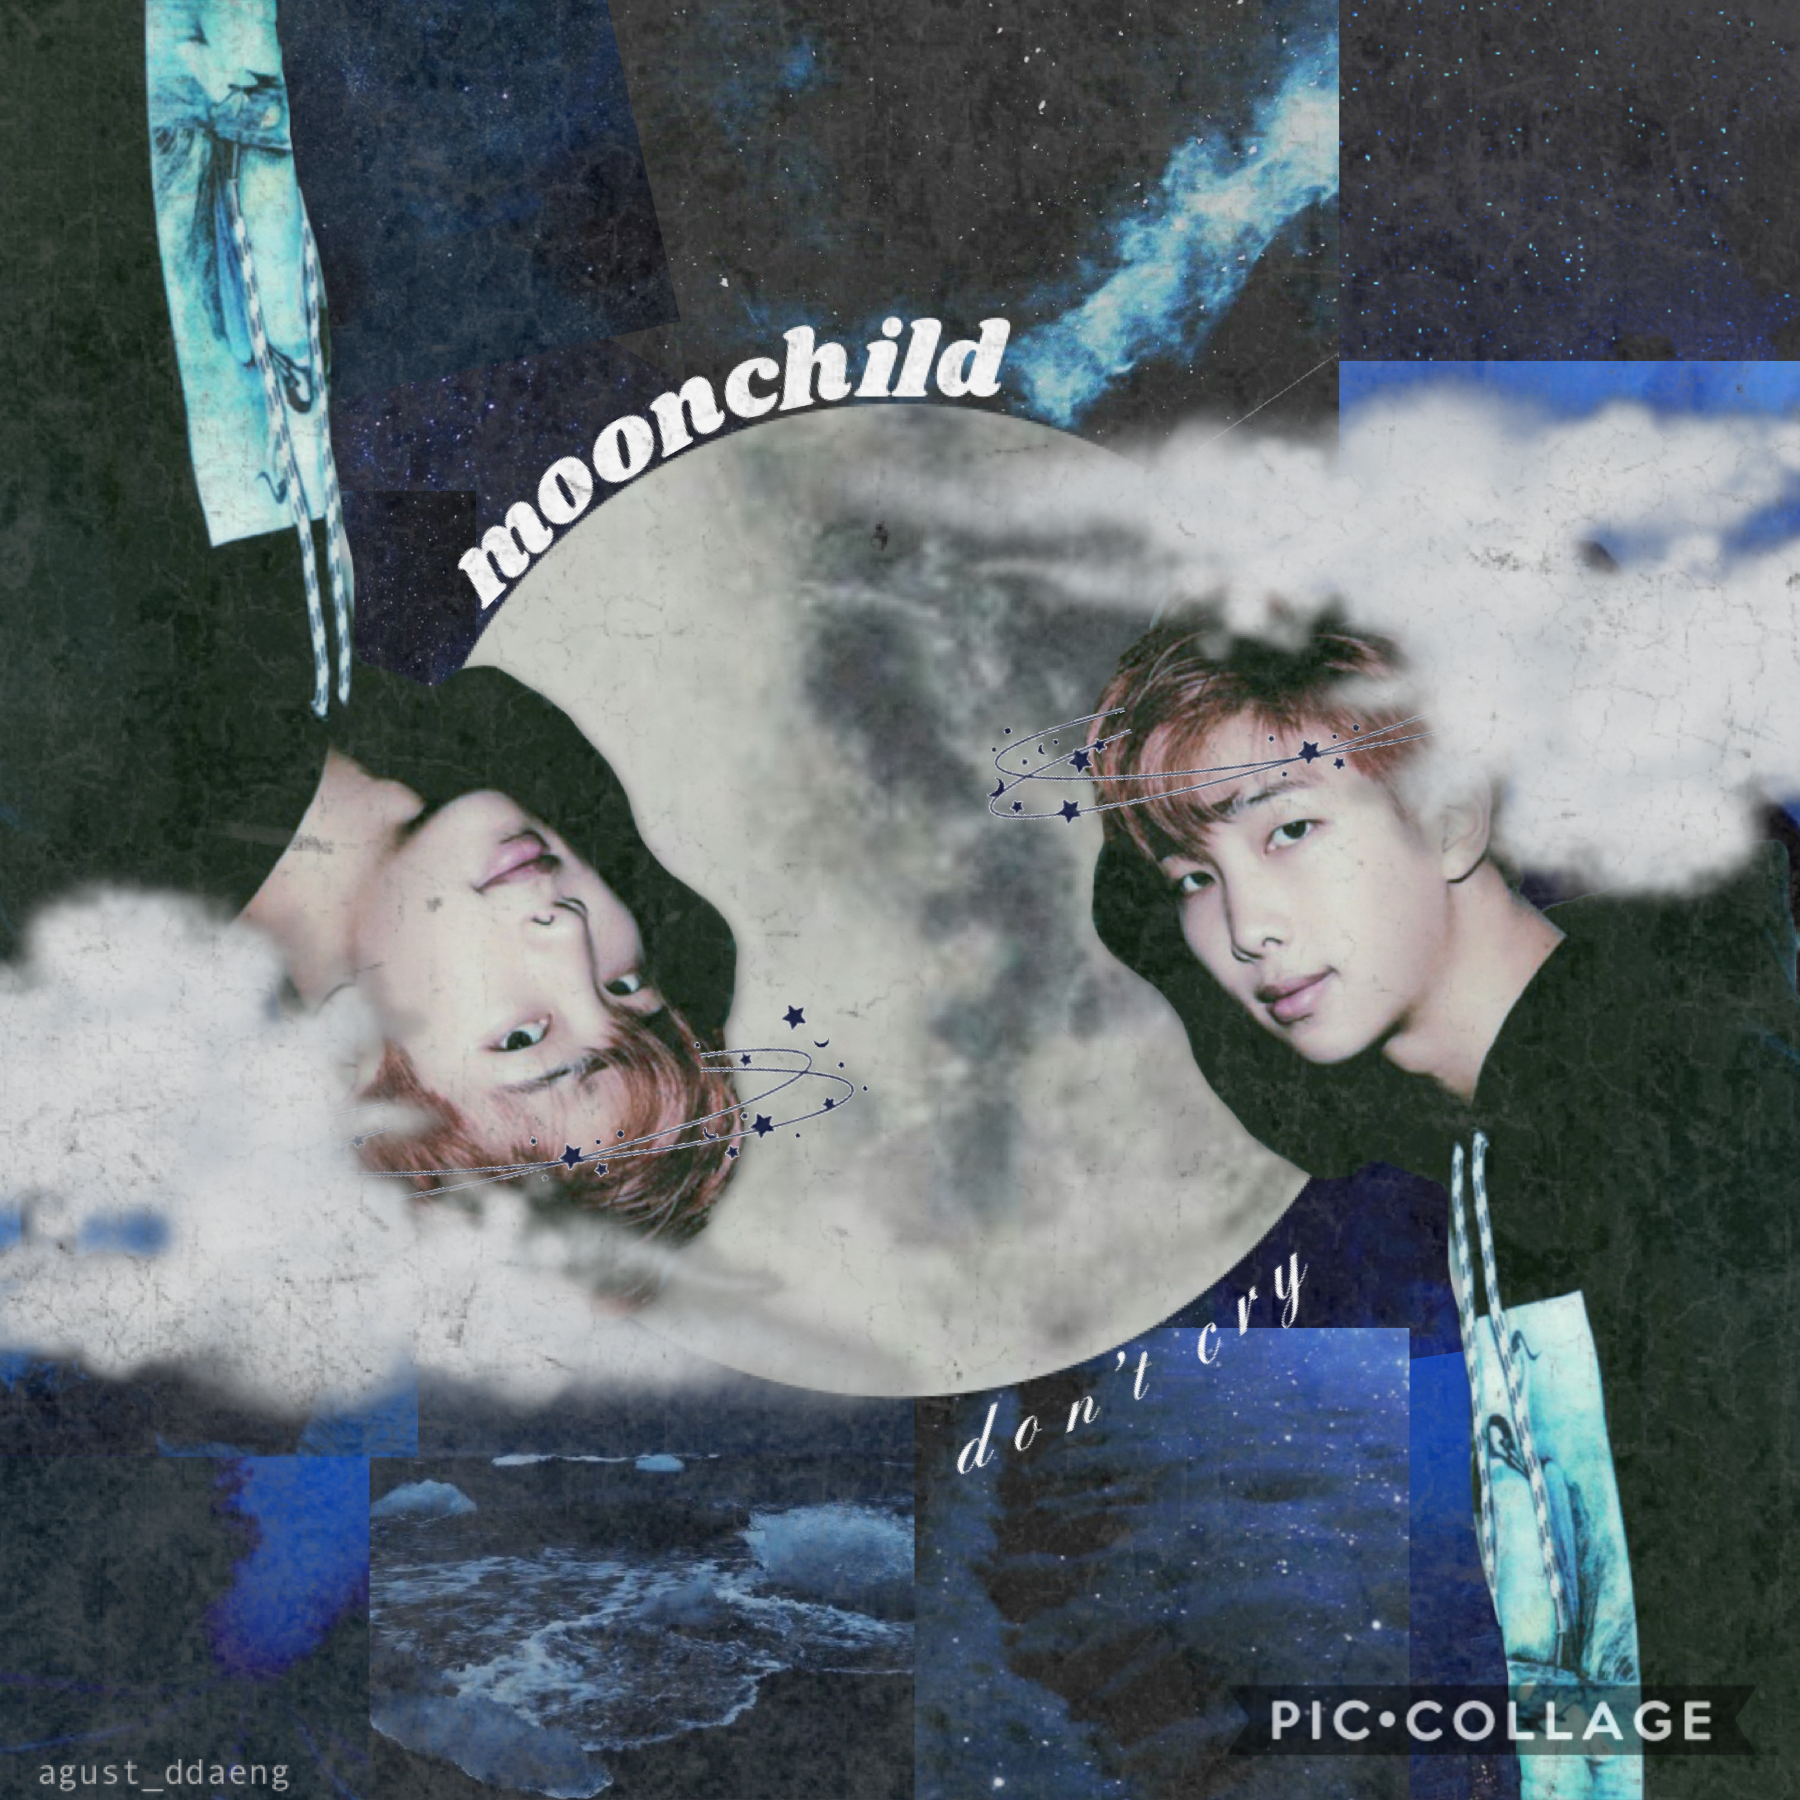 -🌙- 
1 / 5 / 2020 
my birthday is tomorrow and I’m super excited :)) this edit took me a while to finish lol. stream moonchild! 
I’ve noticed a lot of people have ‘internet names’ on here, and since my username has ‘Agust’ in it, August will be the name y